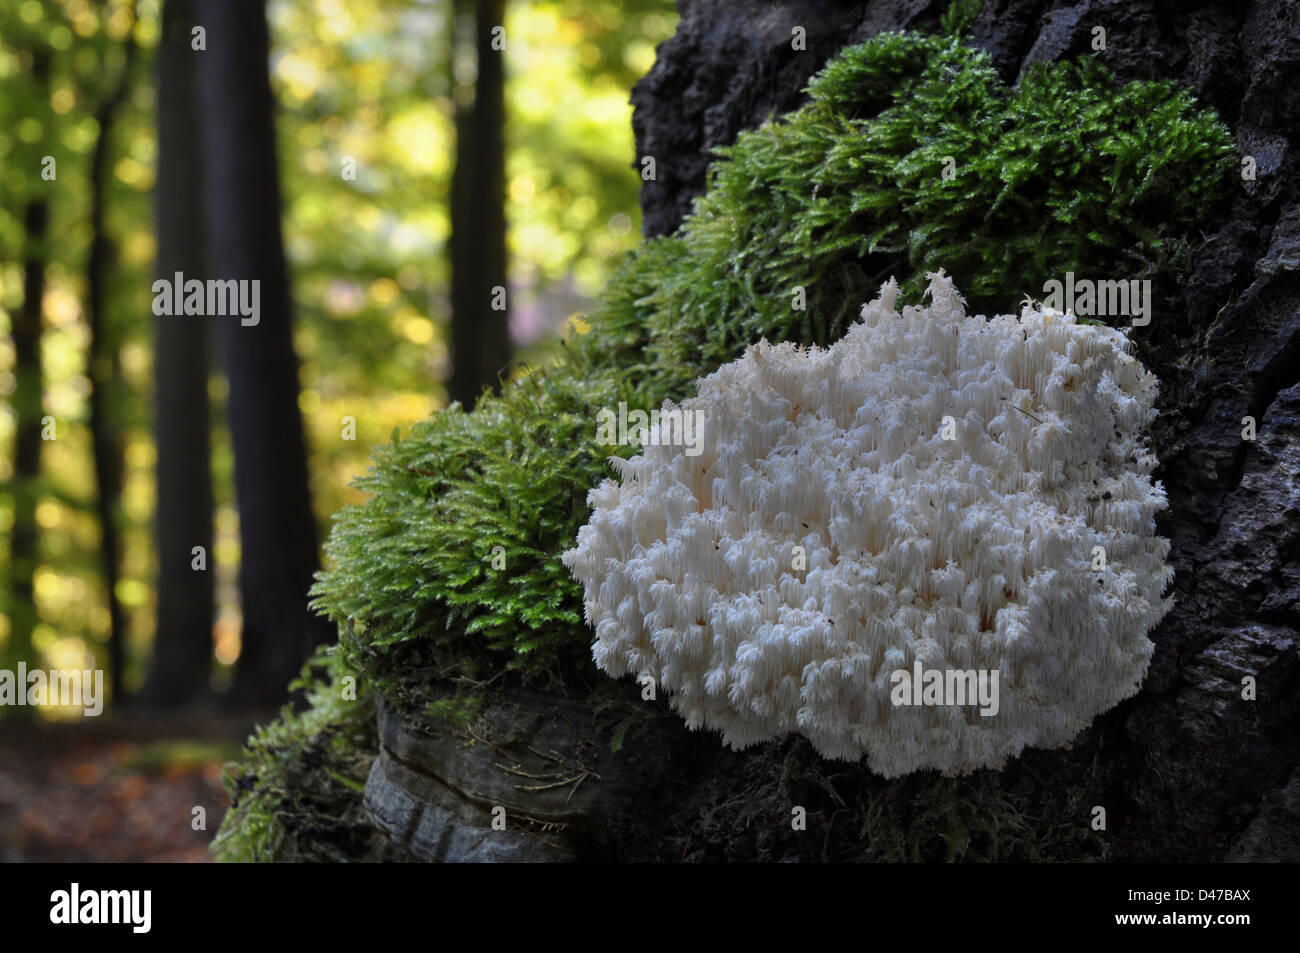 Coral Tooth (Hericium coralloides), fruit body at the base of a tree Stock Photo